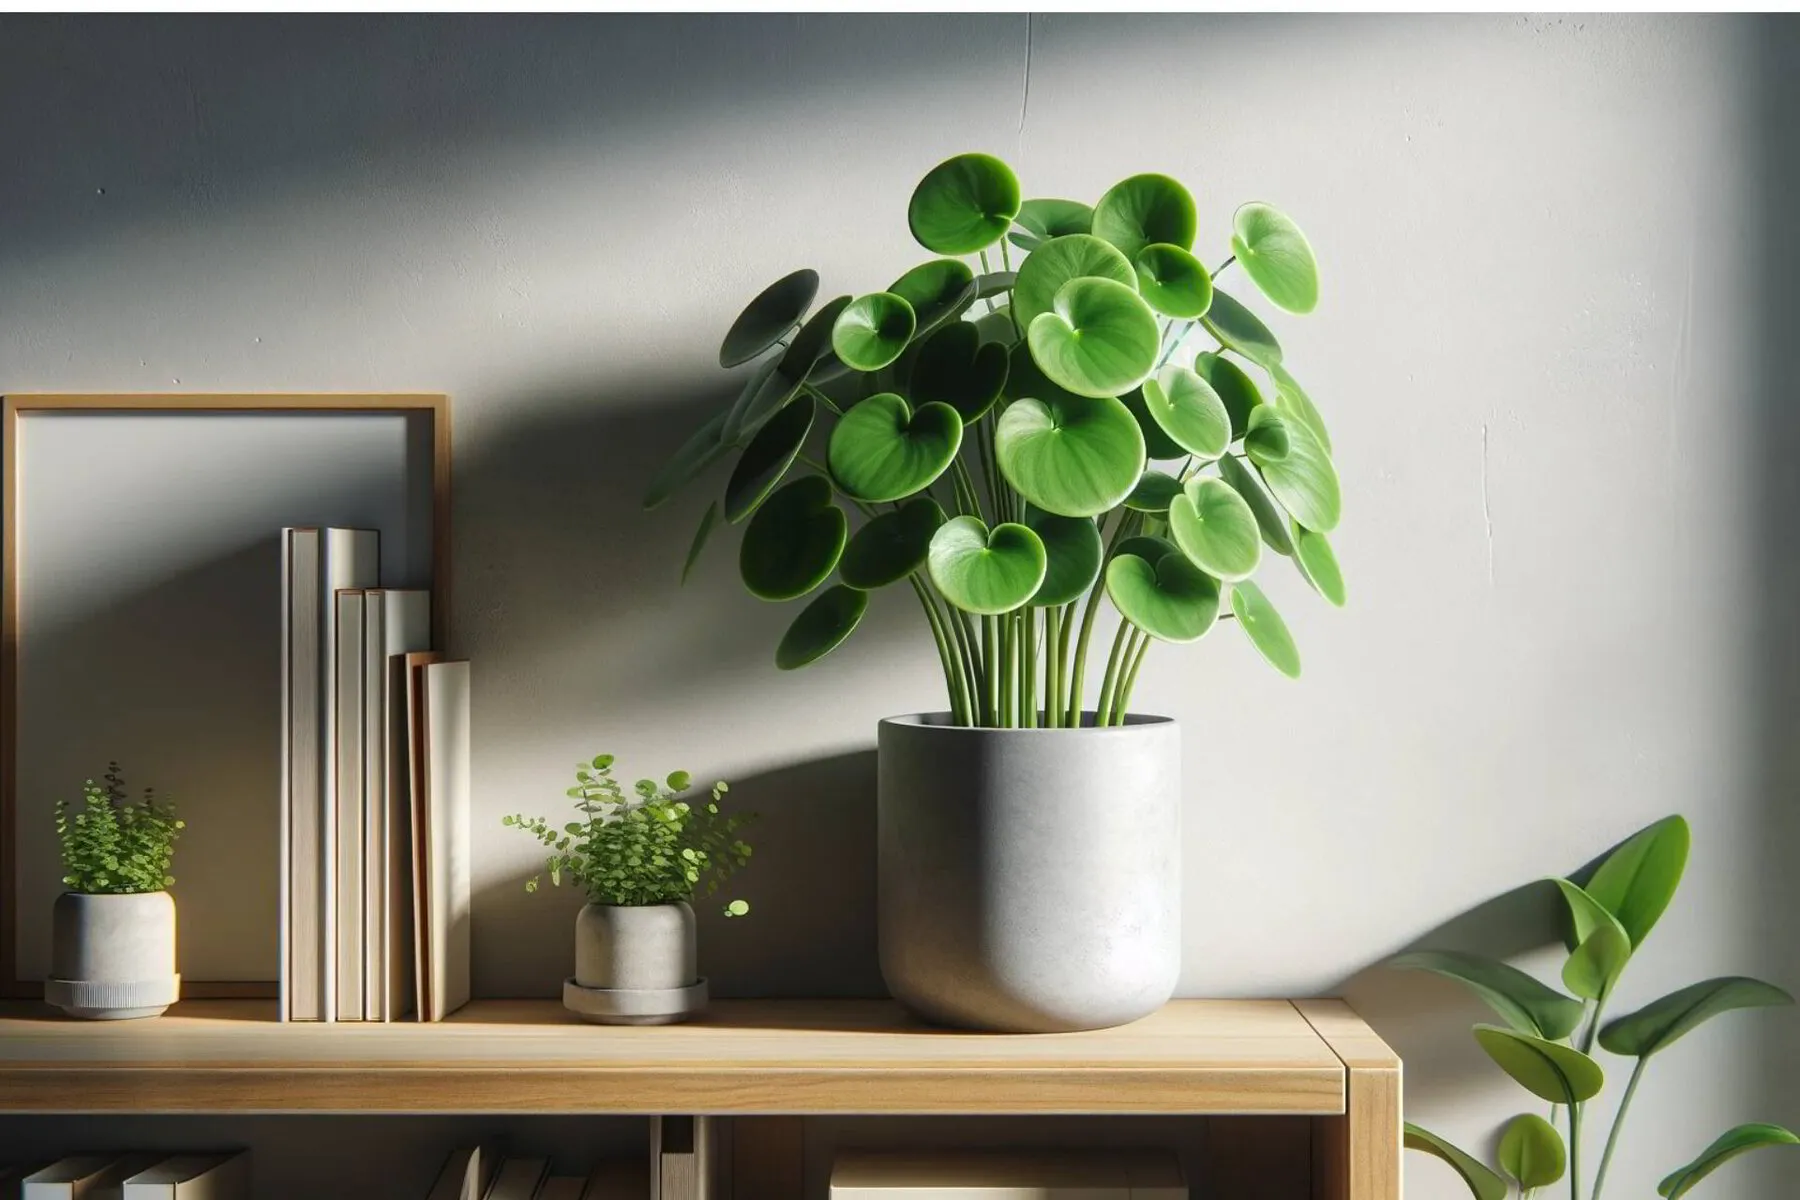 Pilea Peperomioides, also known as the Chinese money plant, with its characteristic round, green leaves